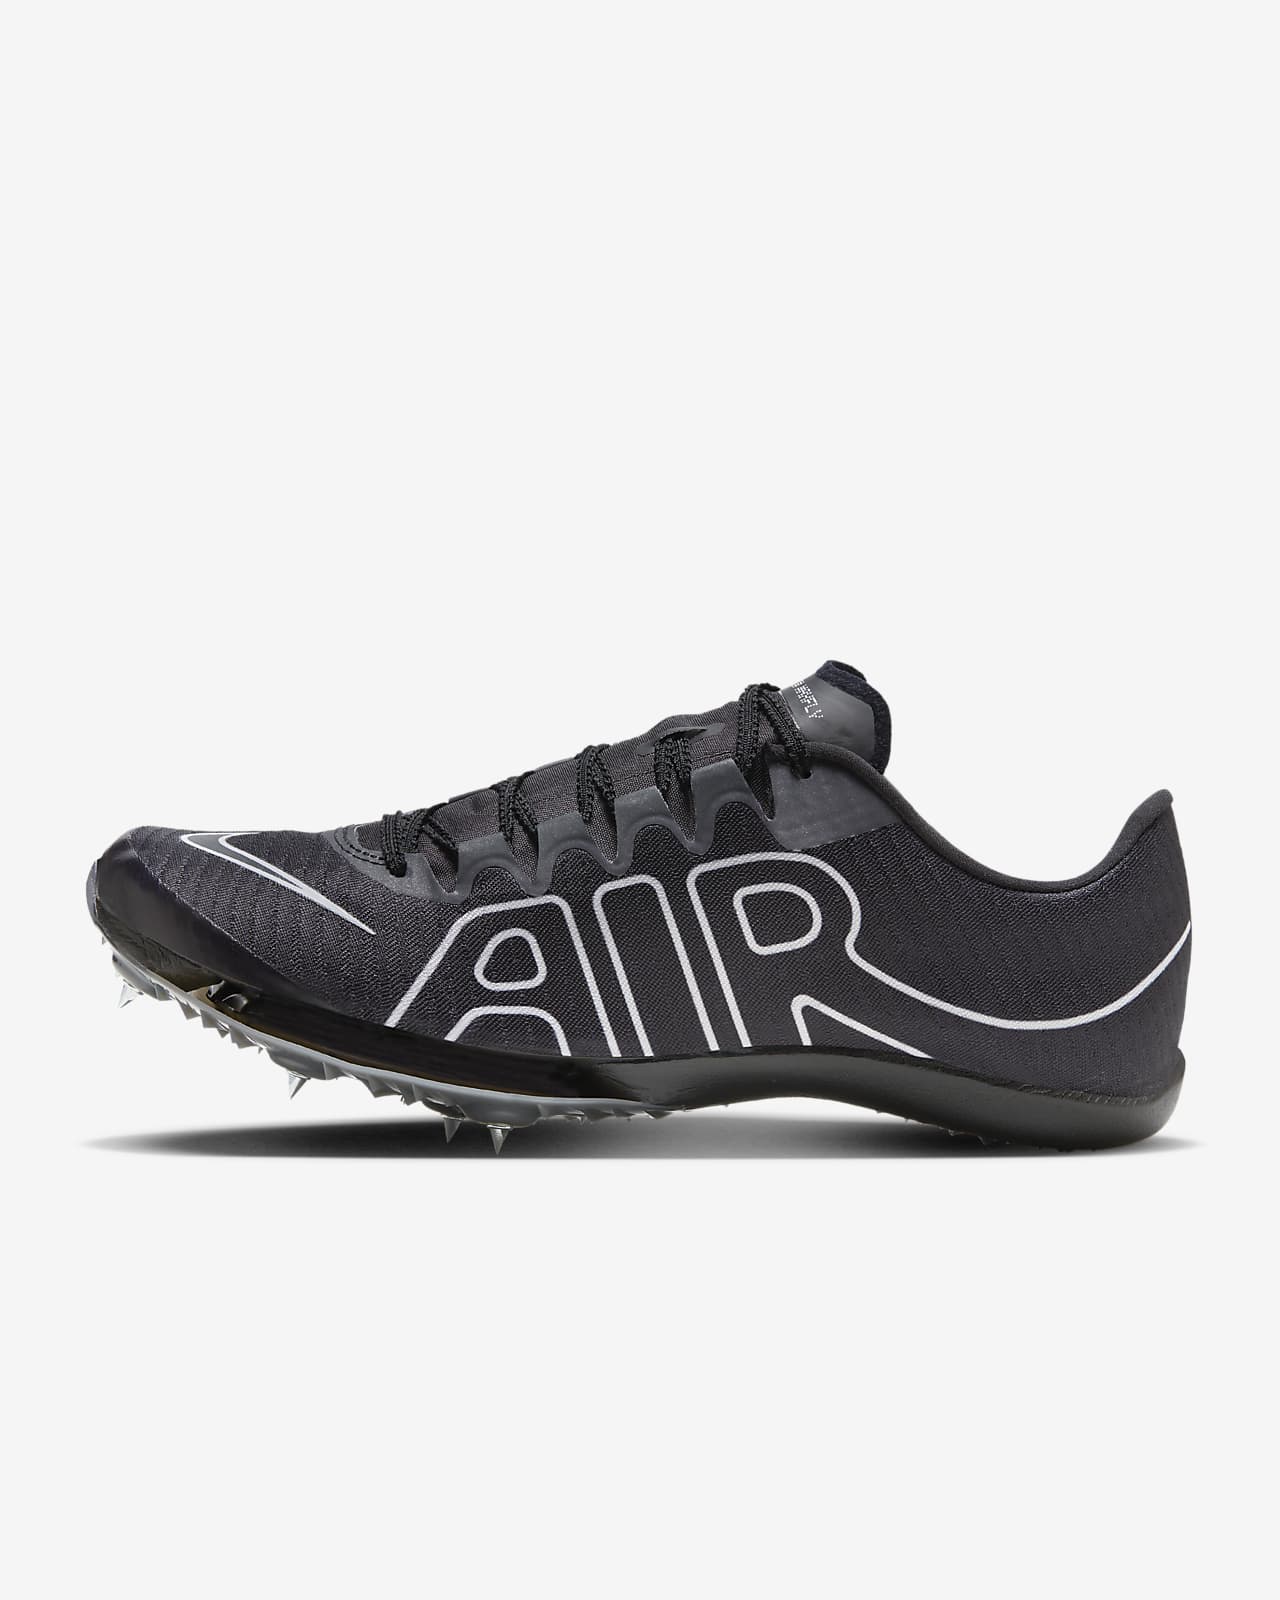 Nike Air Zoom Maxfly More Uptempo 田徑短跑釘鞋。Nike TW